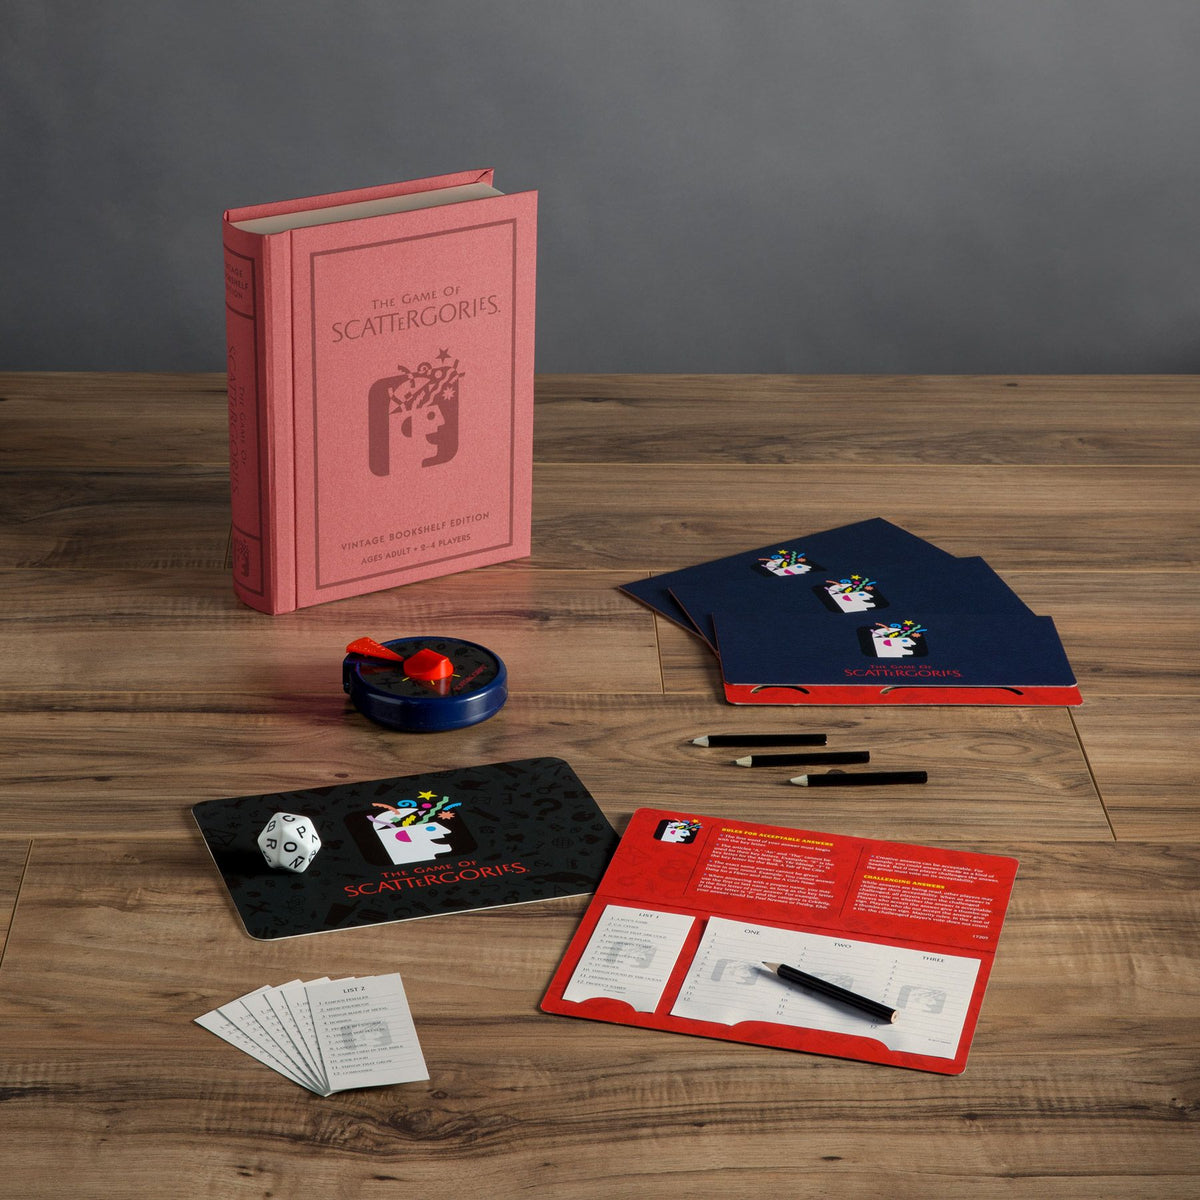 Vintage Bookshelf Edition | Scattergories | WS Game Company